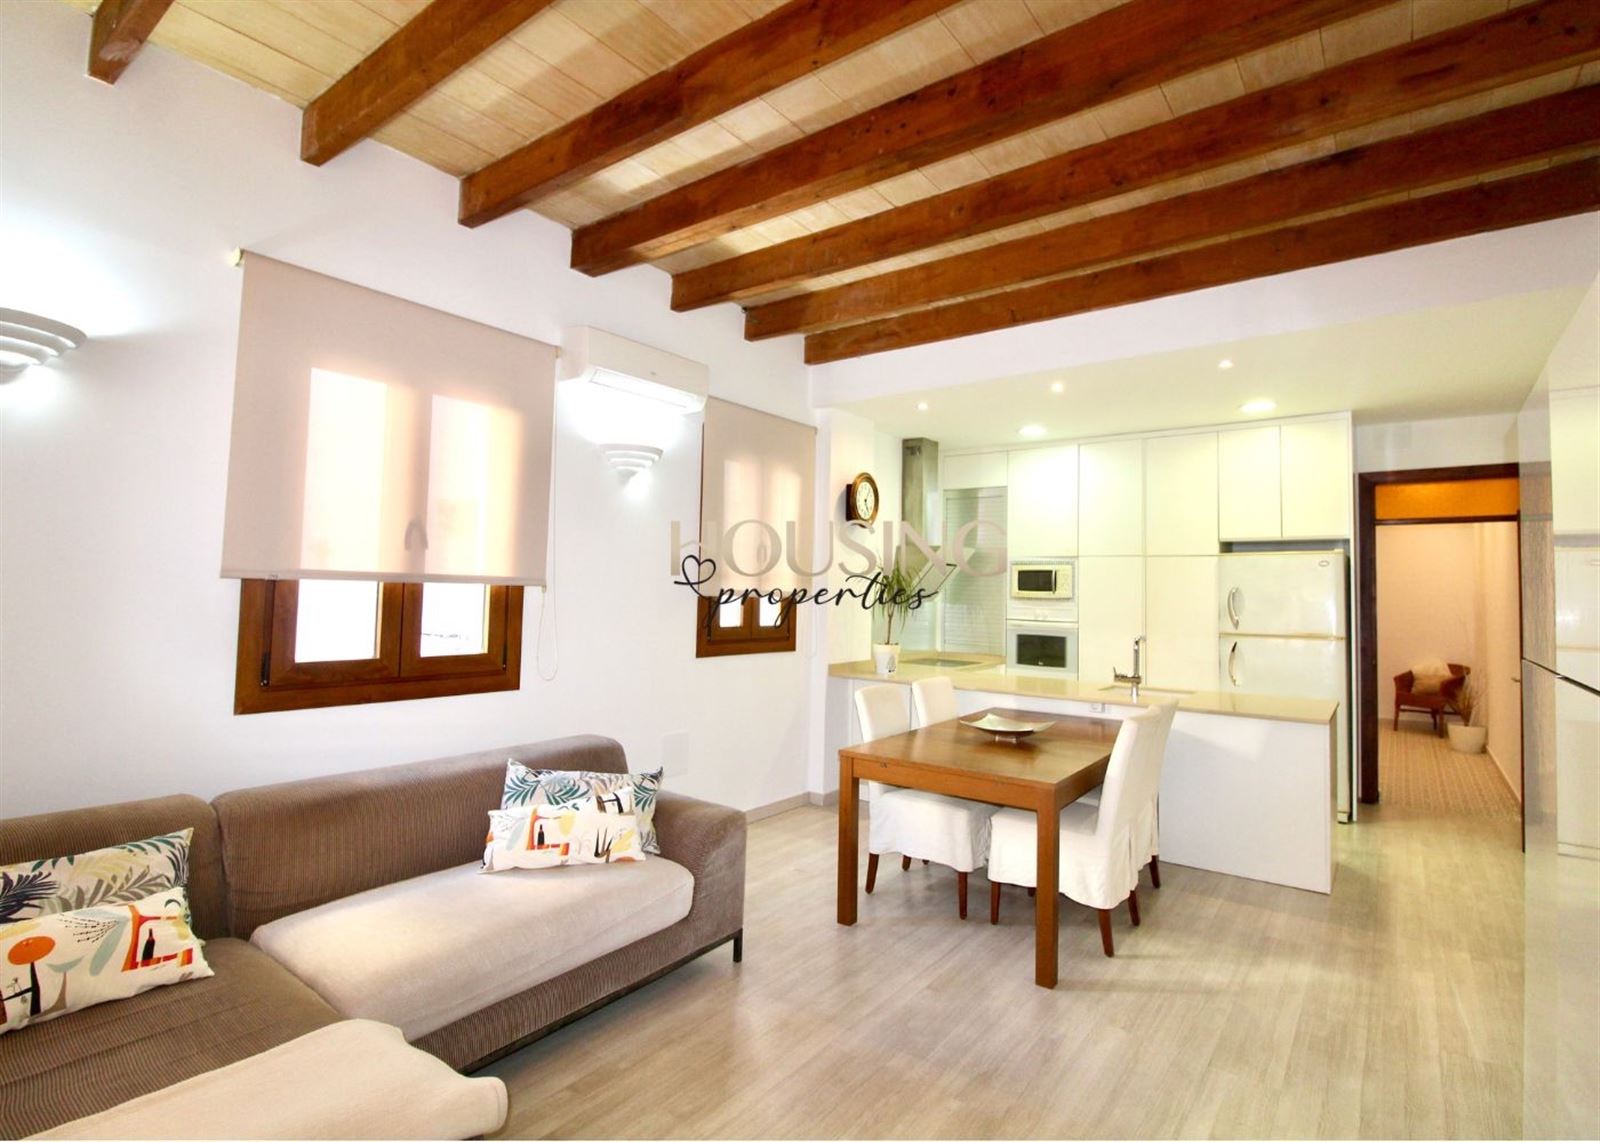 BEAUTIFUL APARTMENT WITH GREAT PERSONALITY IN ARXIDUC/BONS AIRES AREA